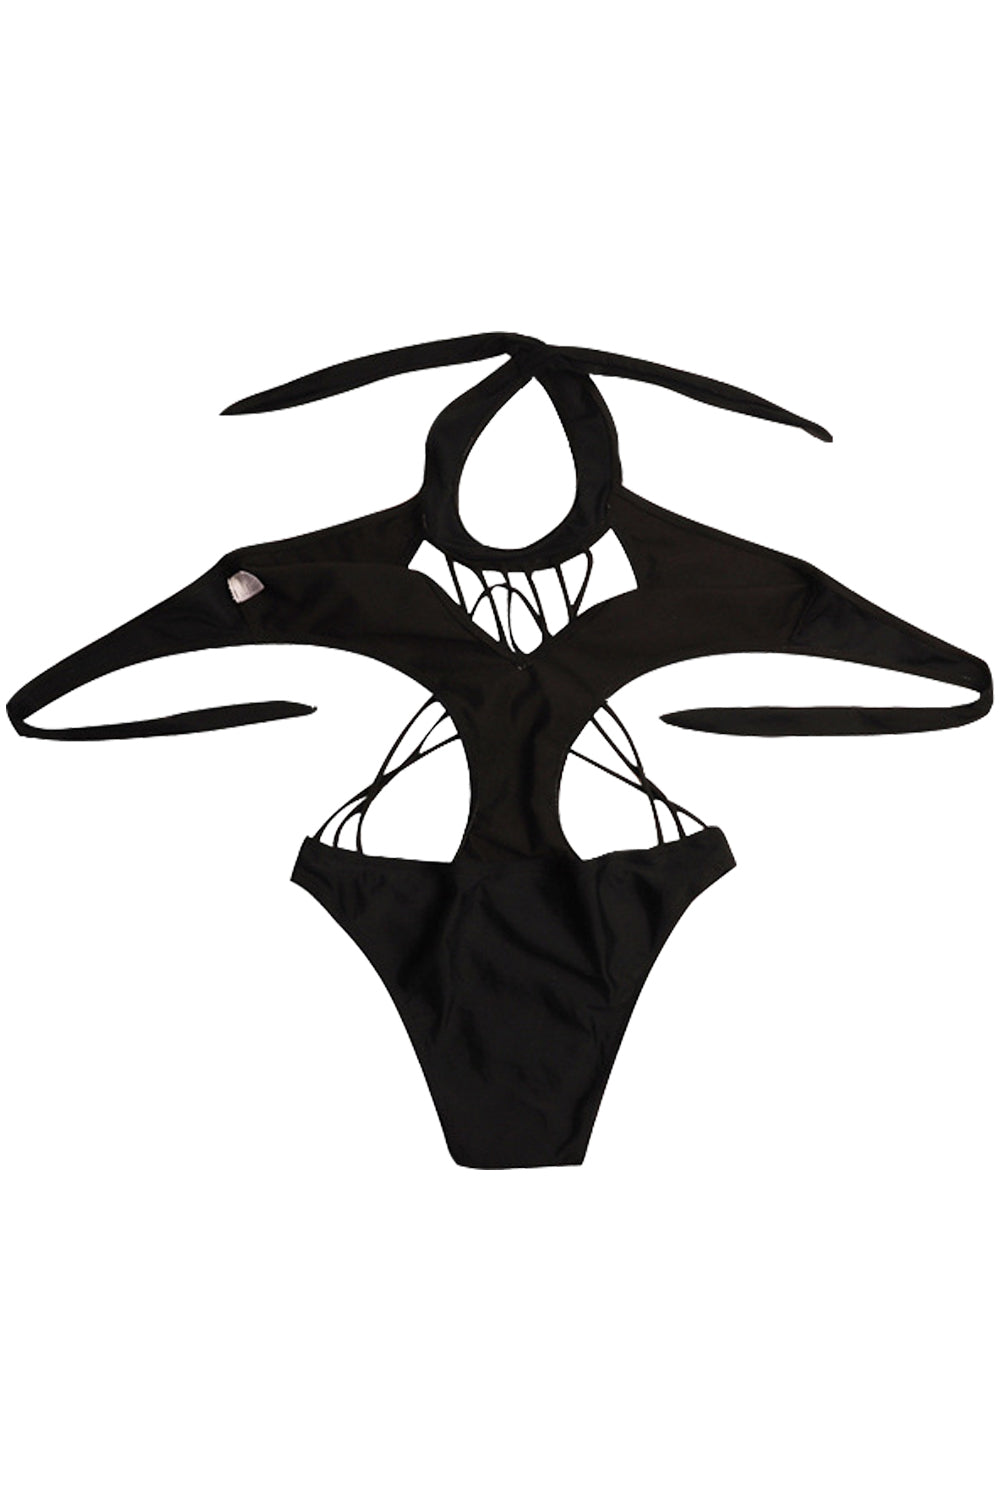 Iyasson Sex Black Hollow Out Design With Strappy Detailing One-piece Swimsuit